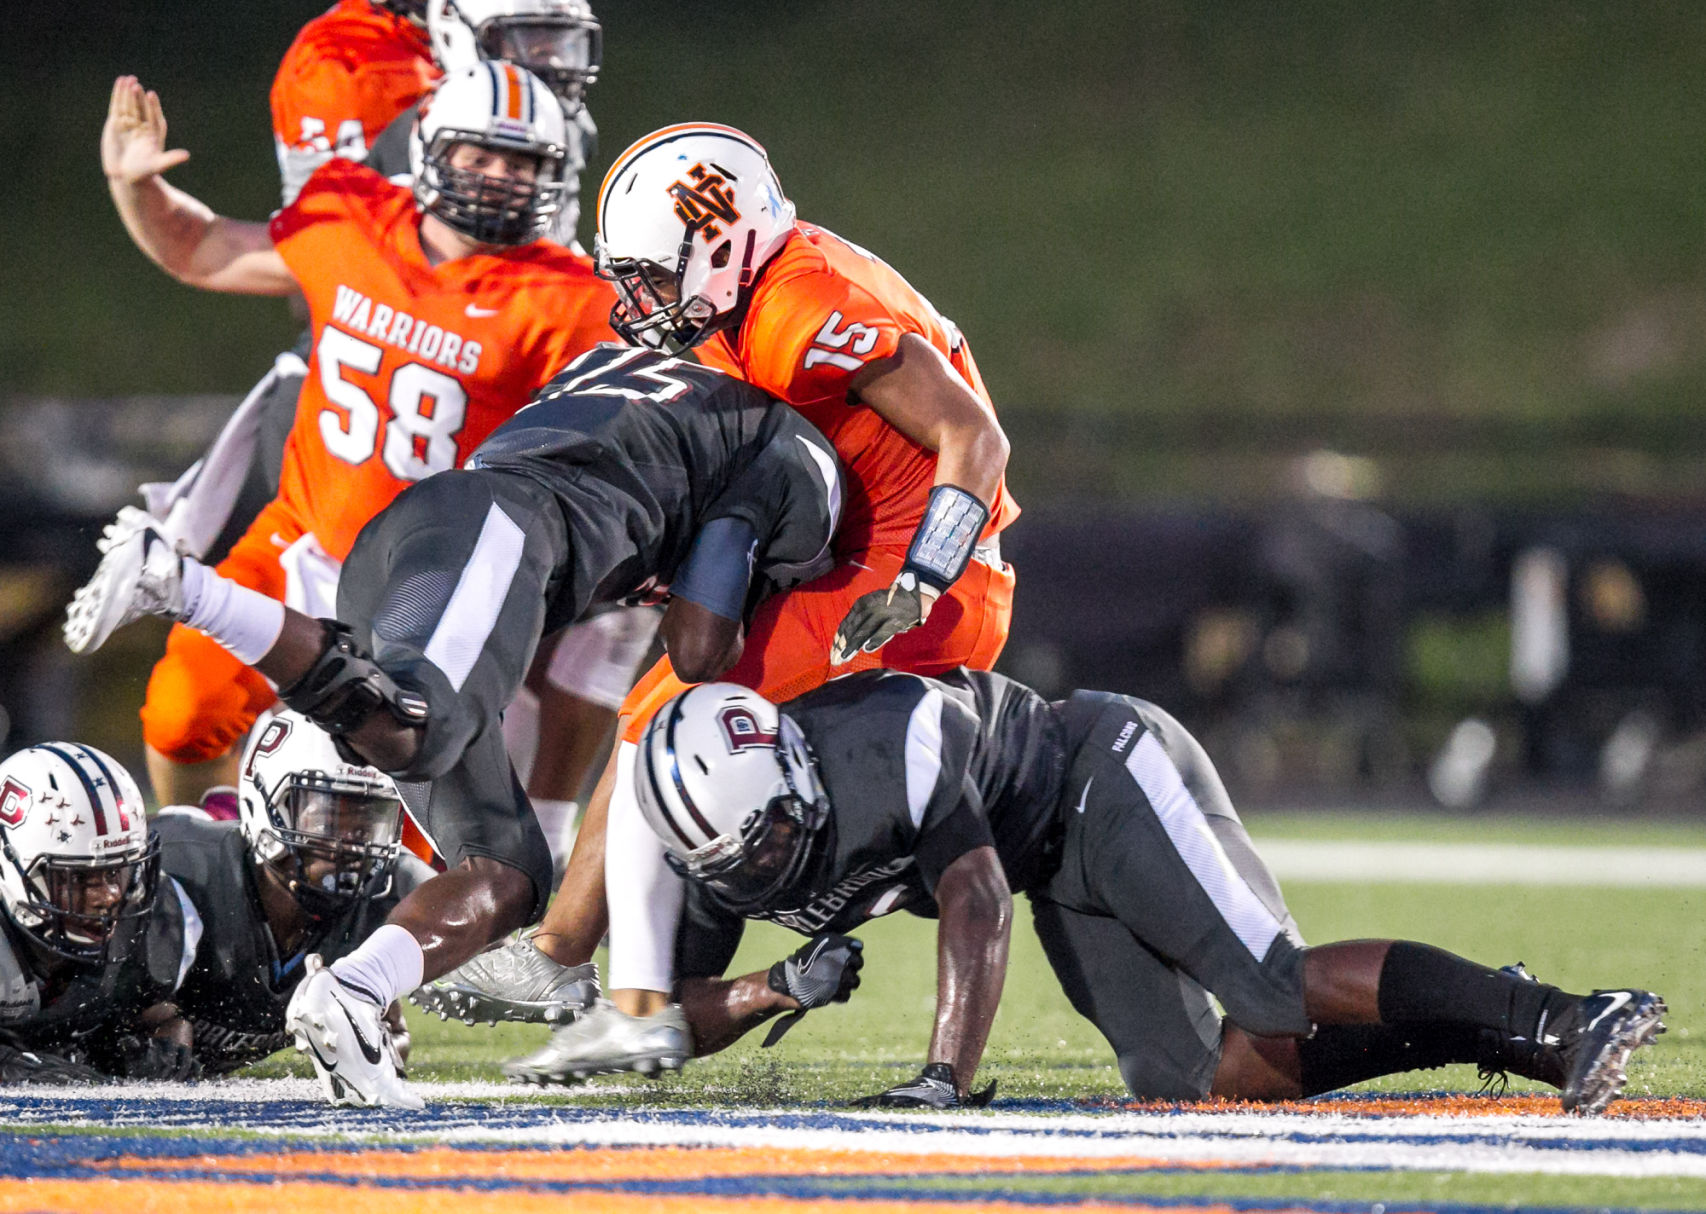 north cobb survives ground-based game to beat harrison in battle of state-ranked teams